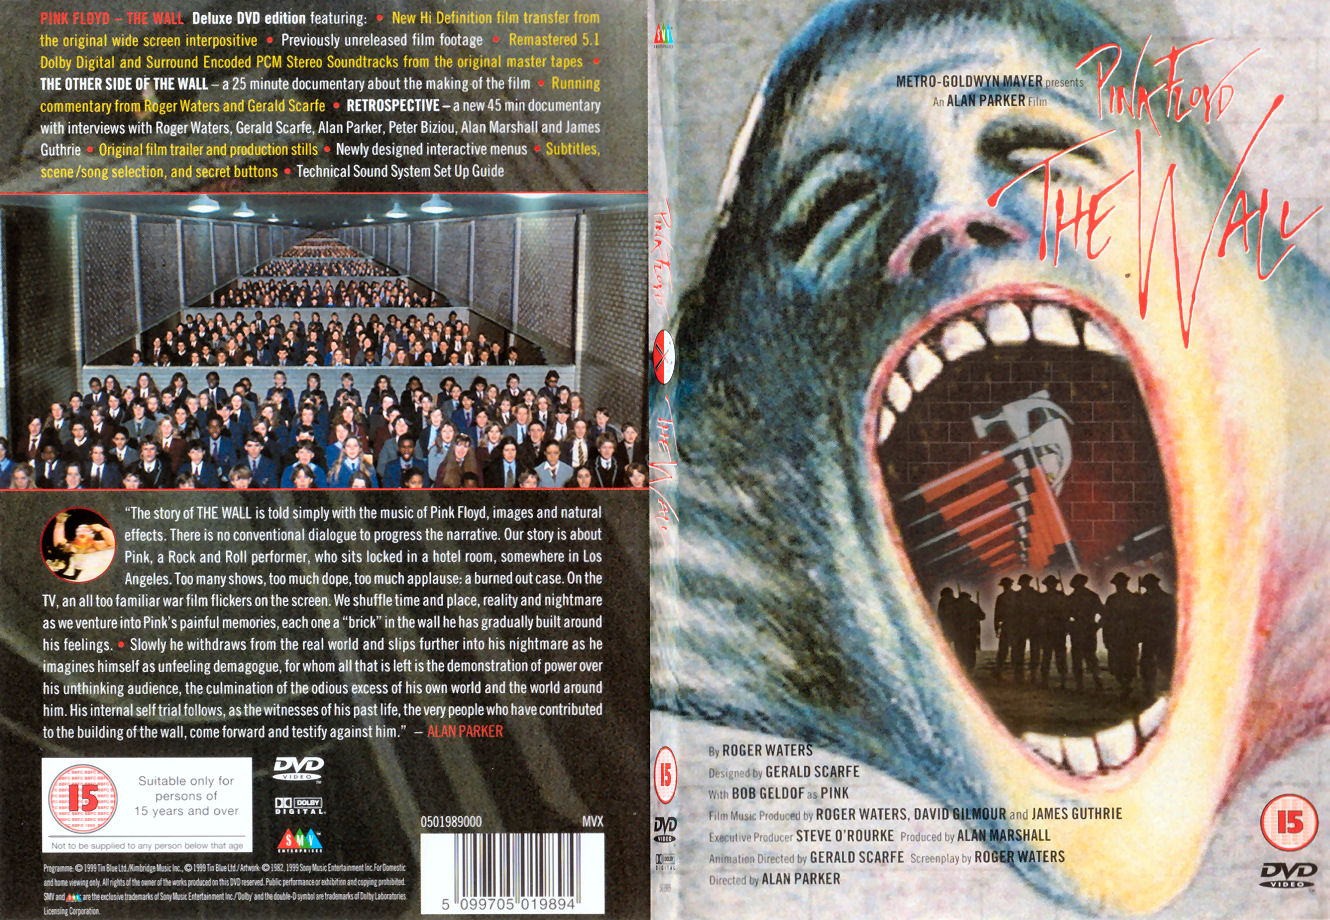 Jaquette DVD Pink Floyd the wall - SLIM